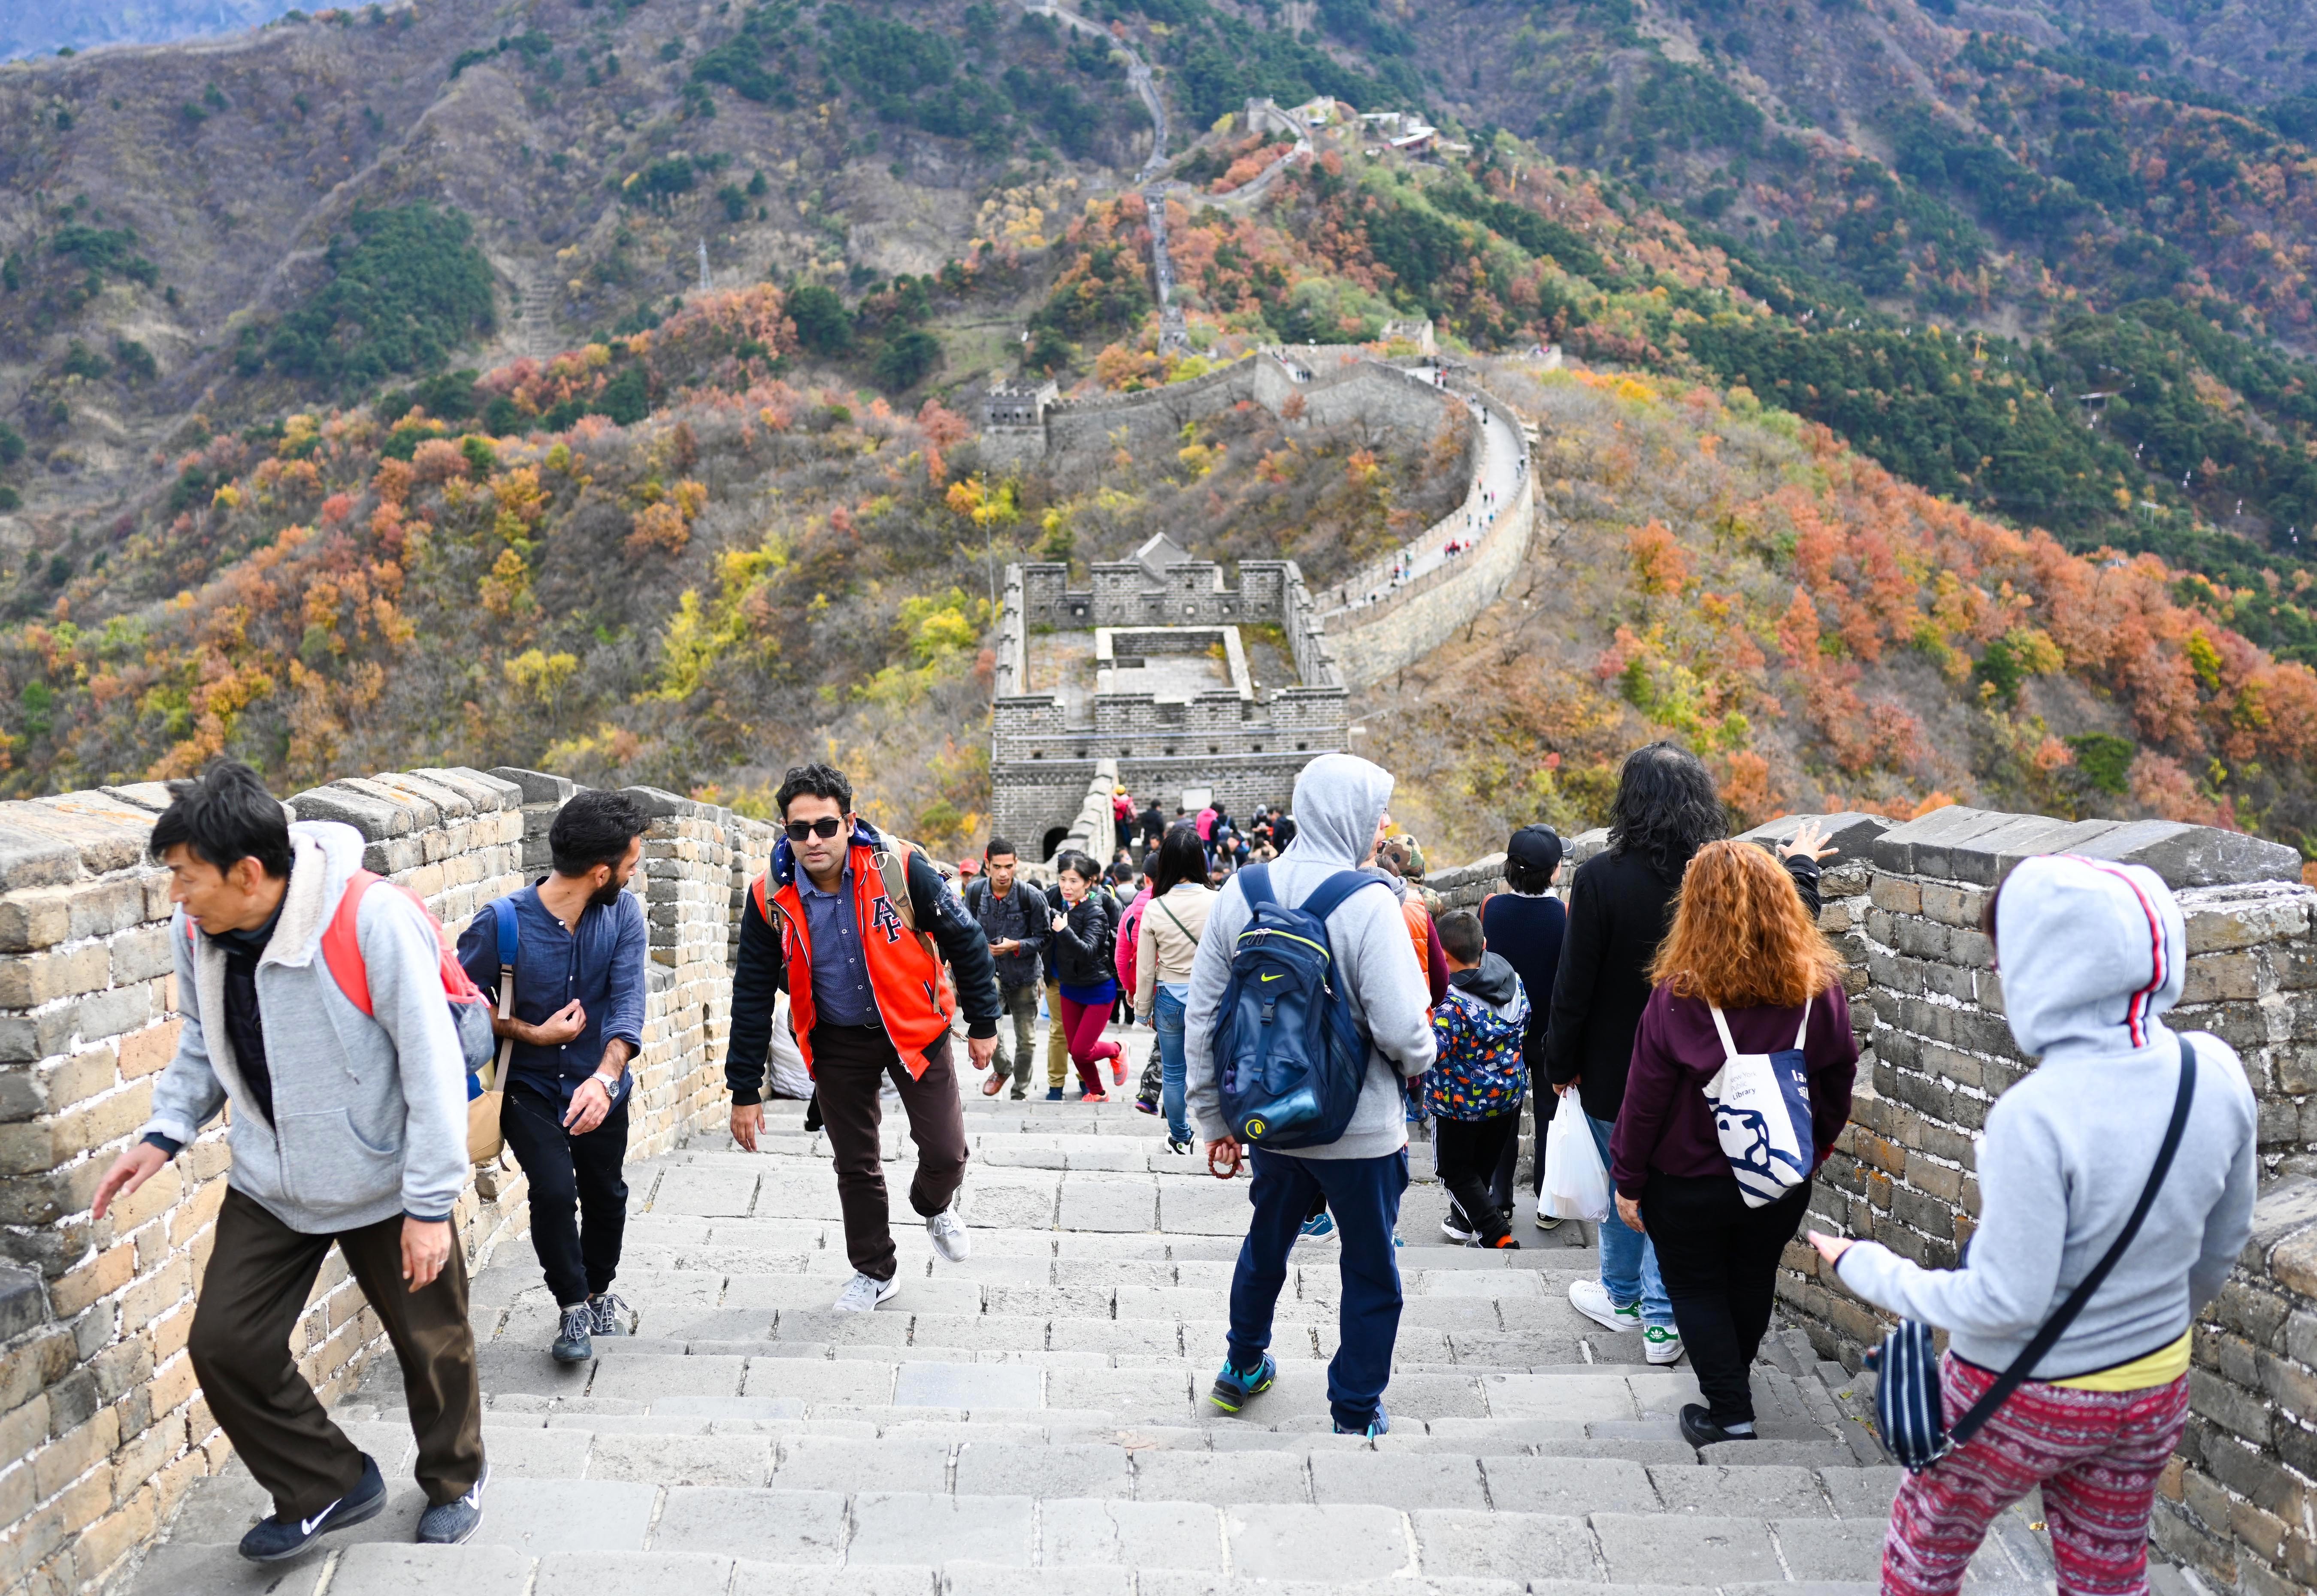 The Great Wall of China was once the setting for a lengthy speech by an “old white guy” about the perceived failings of China’s construction industry. Photo: Xinhua